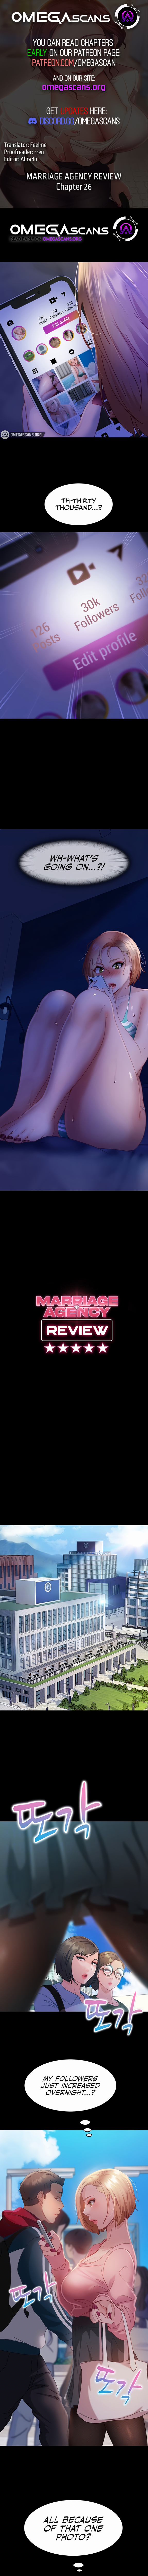 Marriage Agency Review NEW image